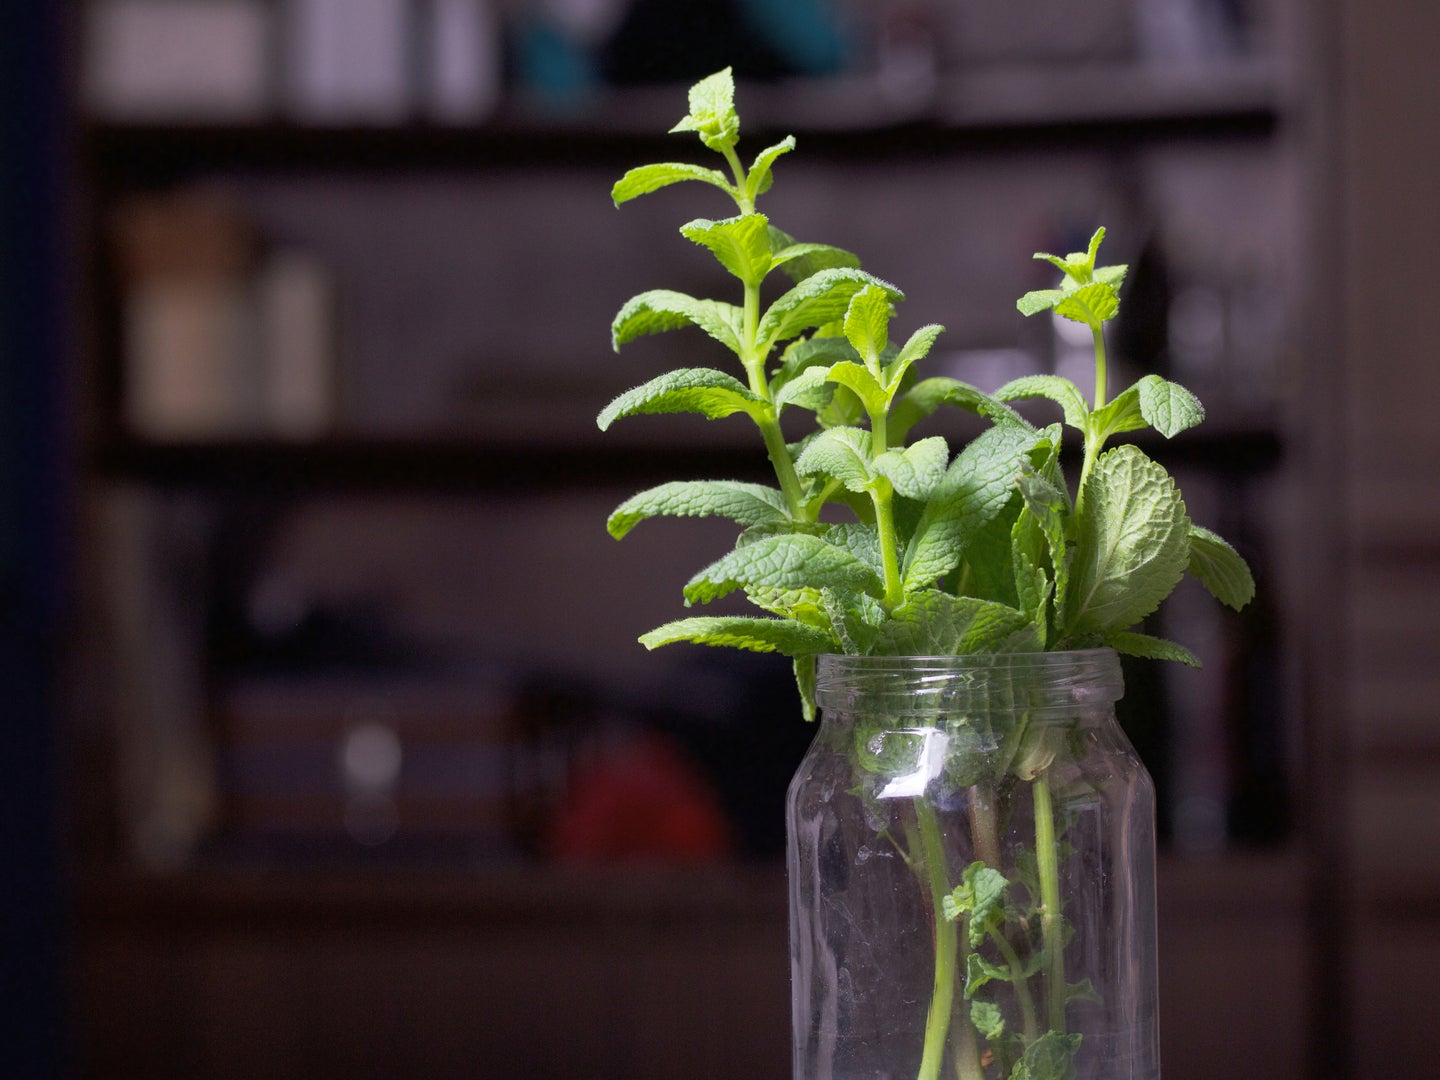 A small mint plant growing roots in a glass jar full of water.